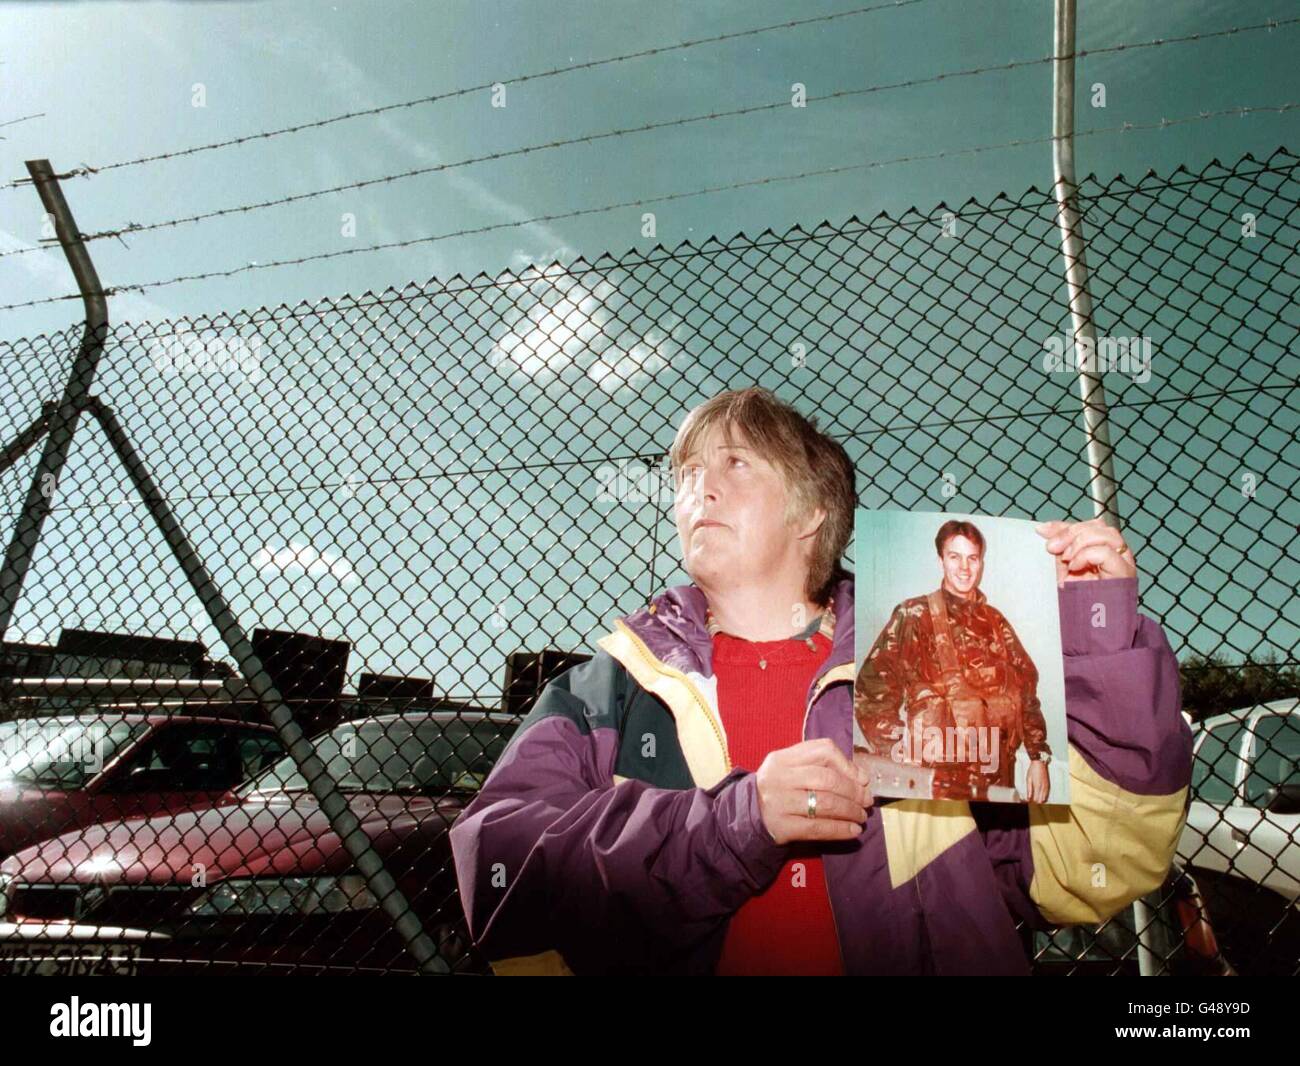 Rita Restorick, holding a photo of her son Lance Bombardier Stephen Restorick who was shot dead by the IRA in Bessbrook, Co Armagh in February 1997, stands at the gates of Castle Buildings, Stormont where the All Party Talks got under way today (Monday). Mrs Restorick had travelled to Northern Ireland to make a direct plea for all sides to talk peace. See PA story ULSTER Talks Restorick. Photo by John Giles/PA Stock Photo